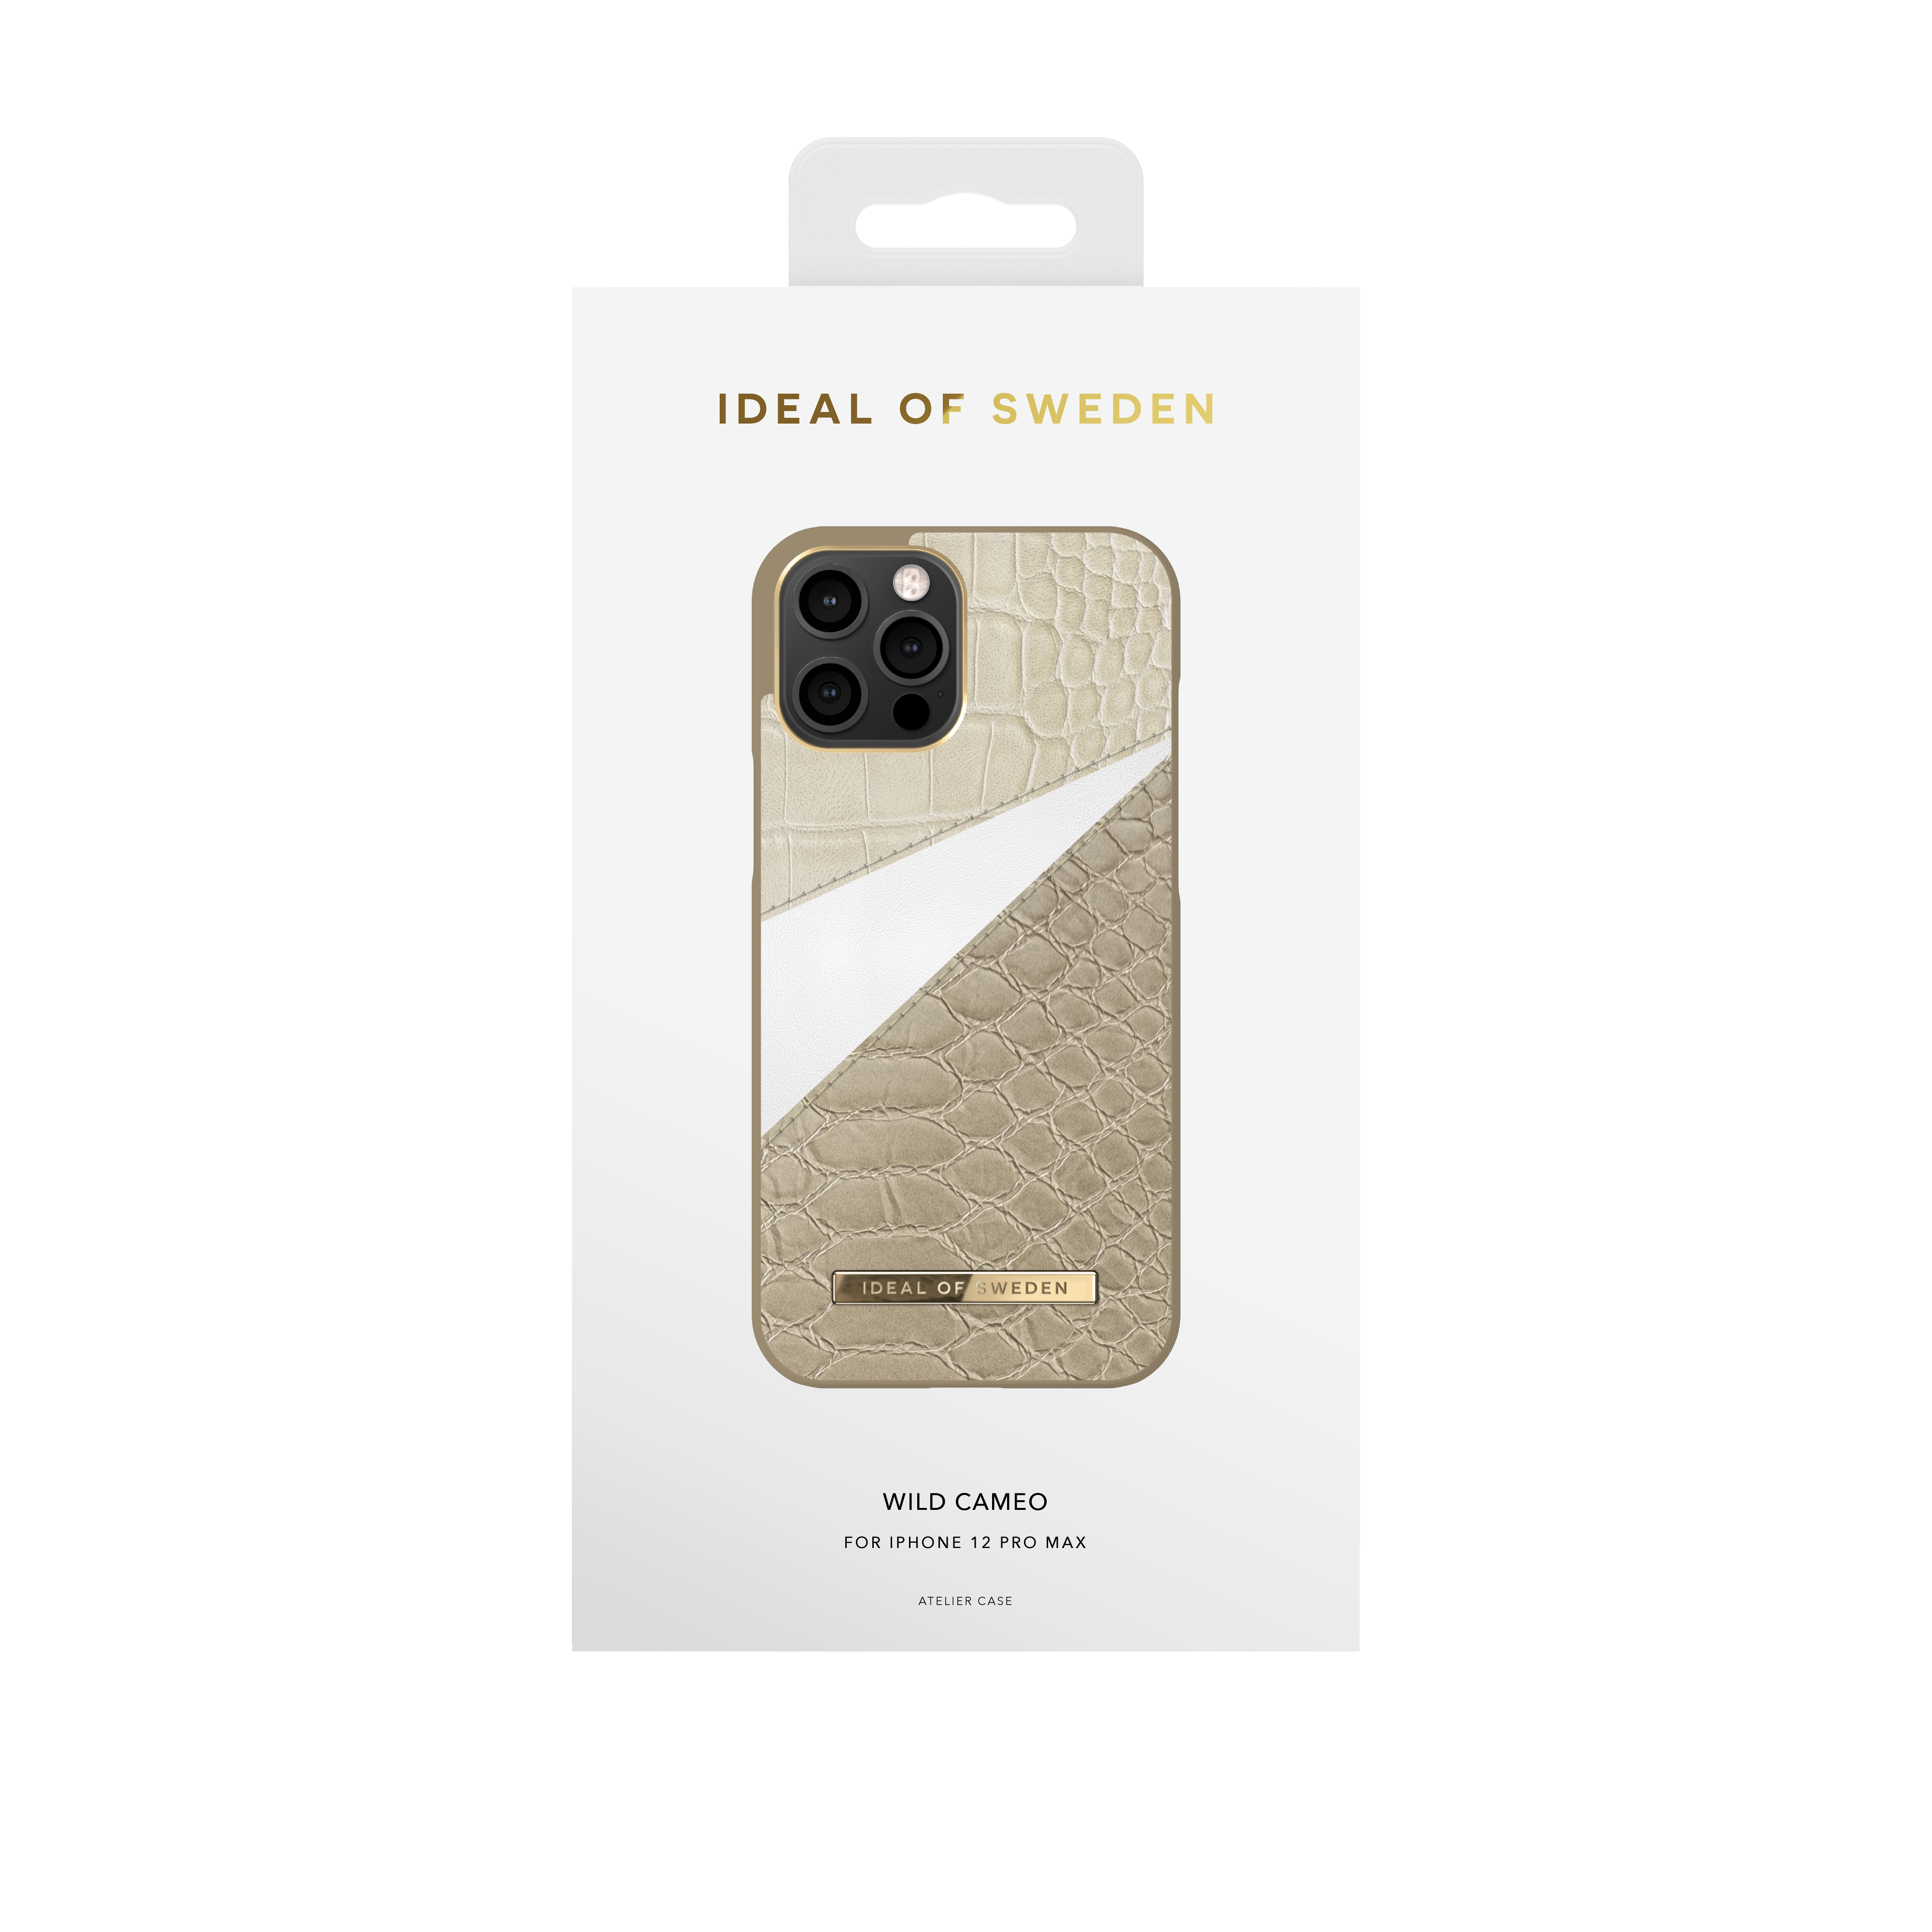 Max, SWEDEN Backcover, OF 12 Pro Apple, IDEAL Wild Cameo IDACAW20-2067-246, IPhone